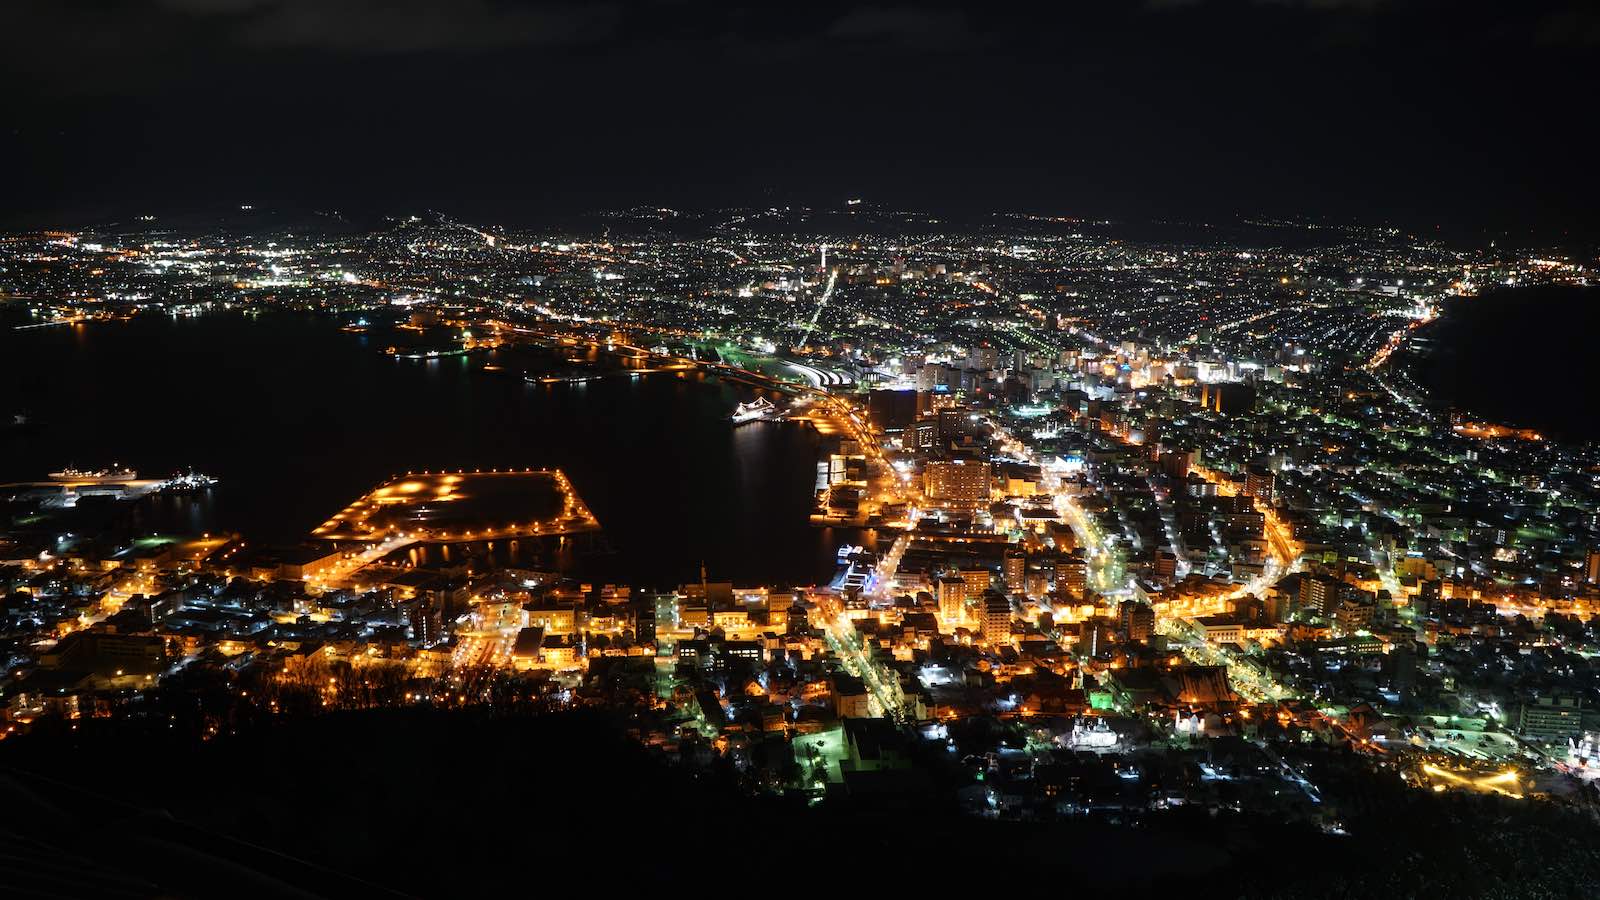 Here's the view I had from on top of Mount Hakodate of the surrounding area. It was better than I thought and I spent about 2 hours up here just admiring the city lights.